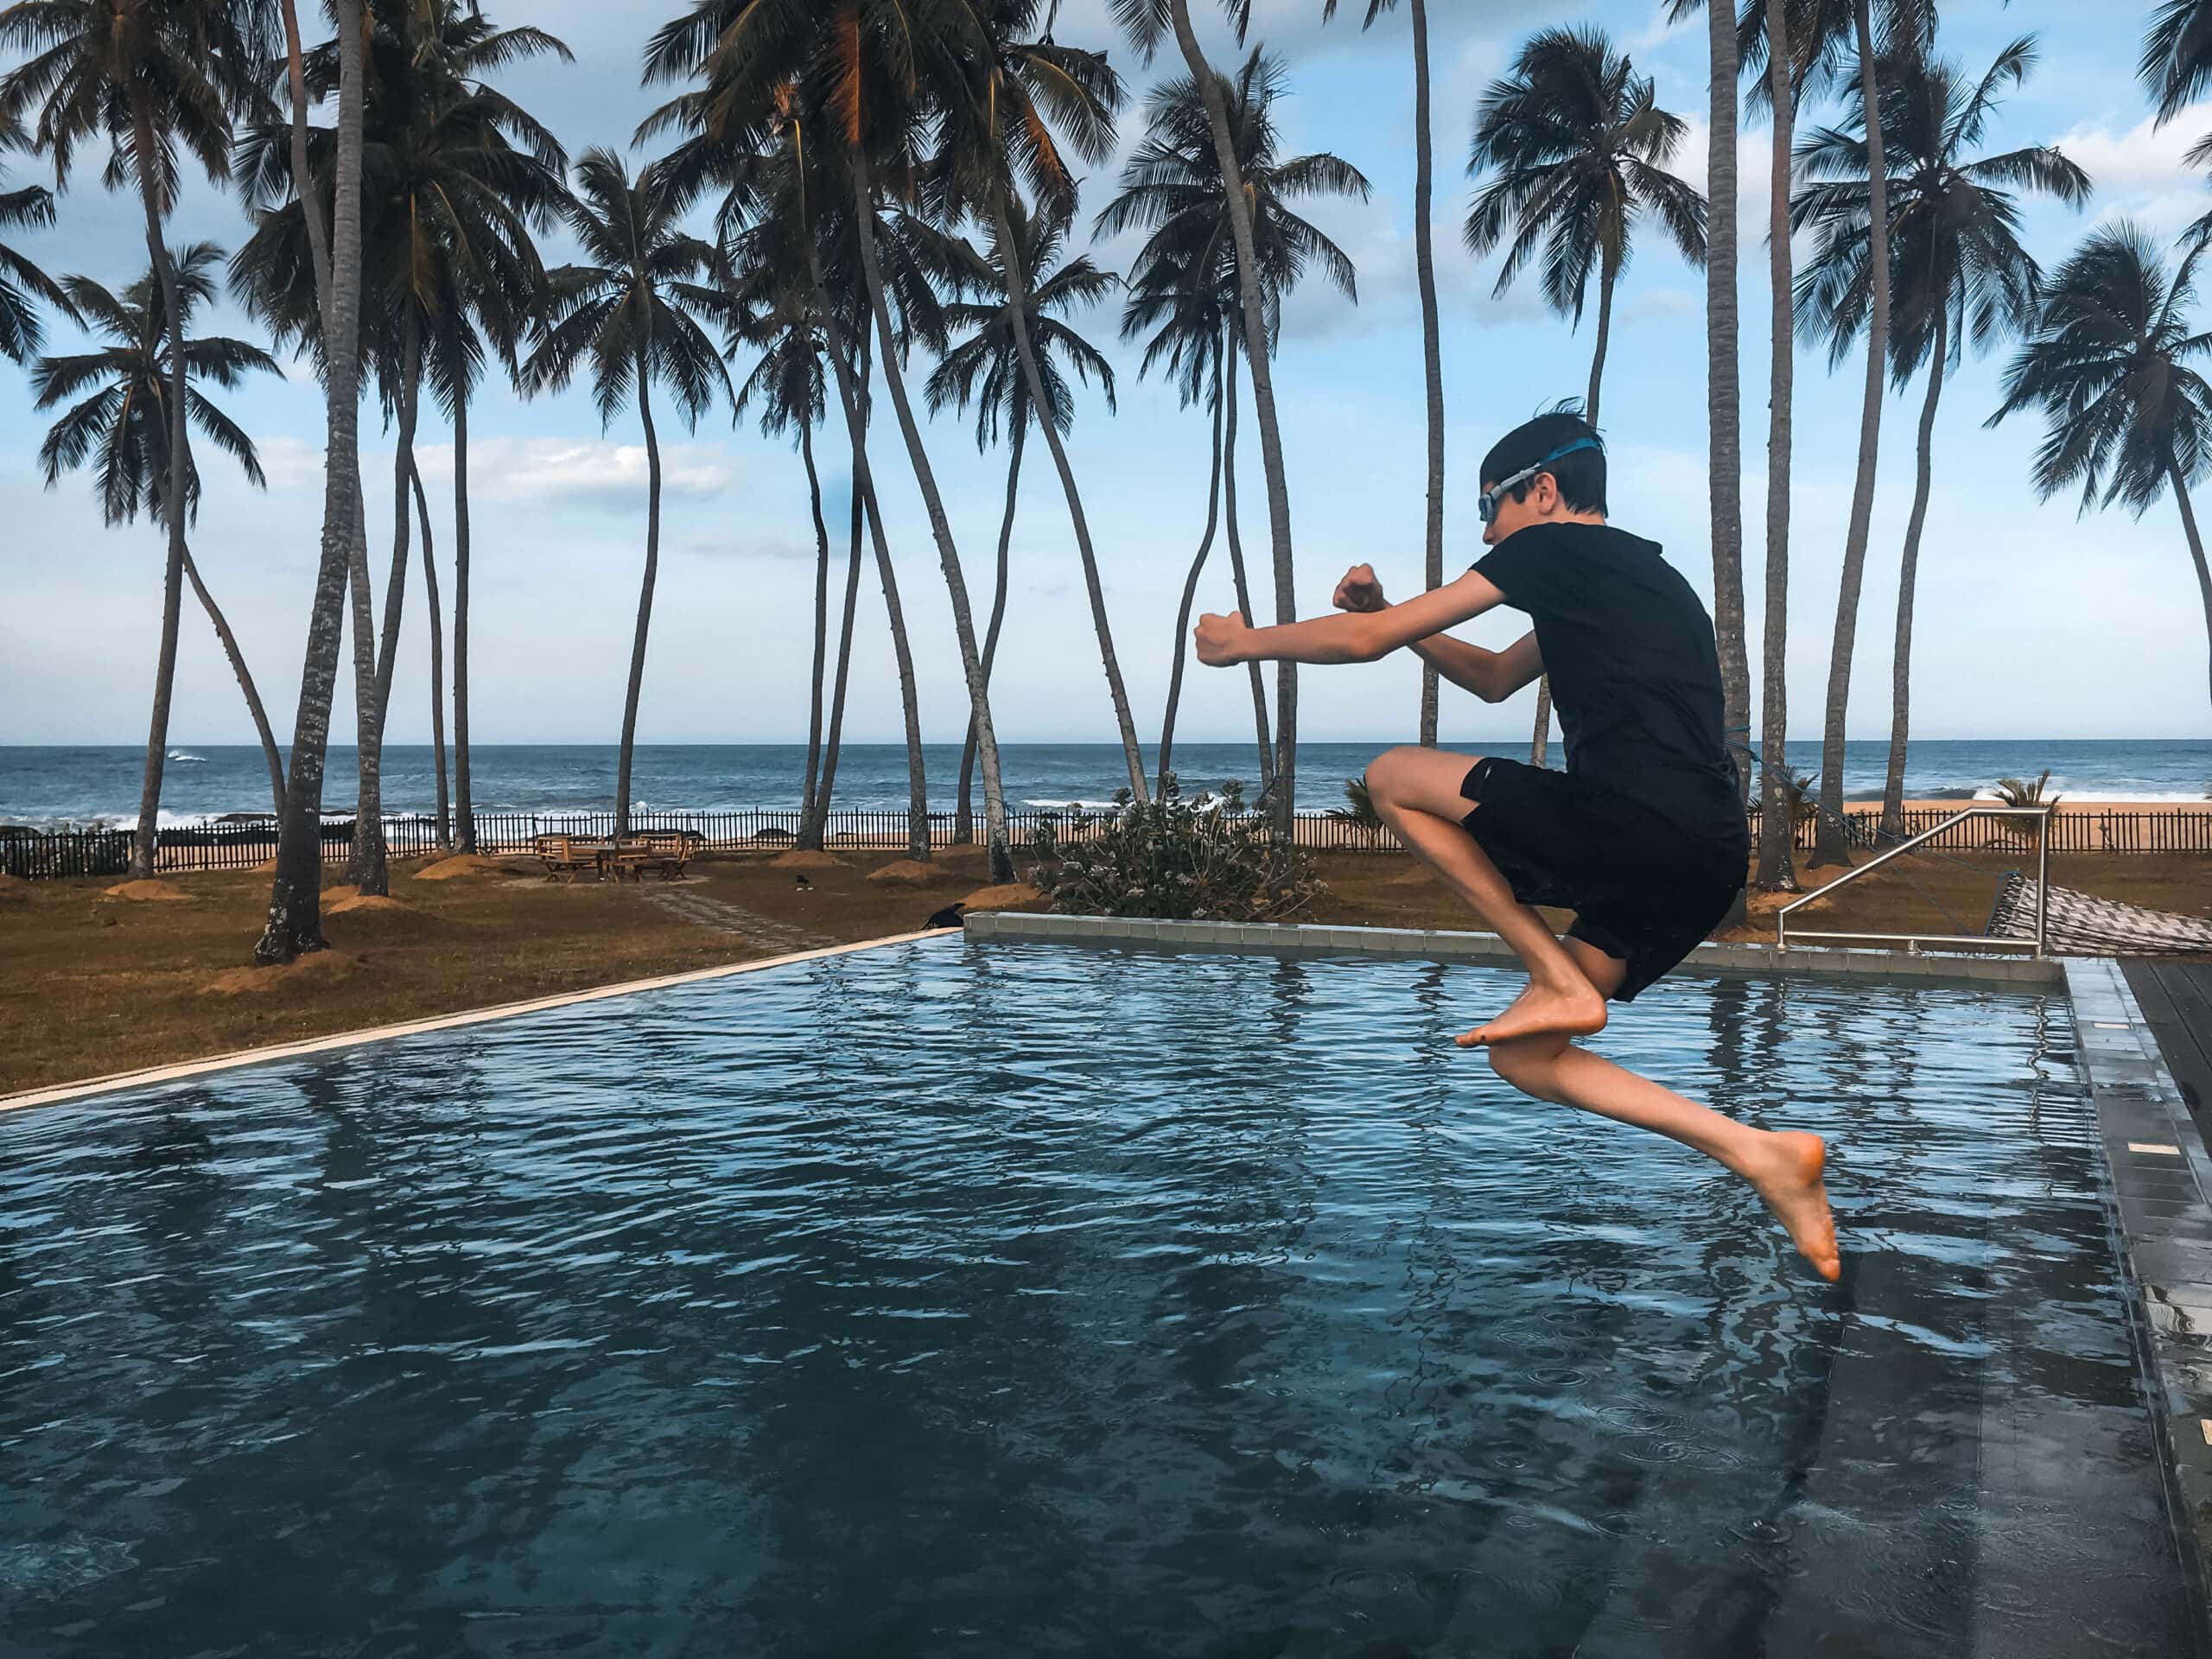 16 year old felix on holiday in Sri Lanka jumping in a pool at Jetwing Arugam Bay